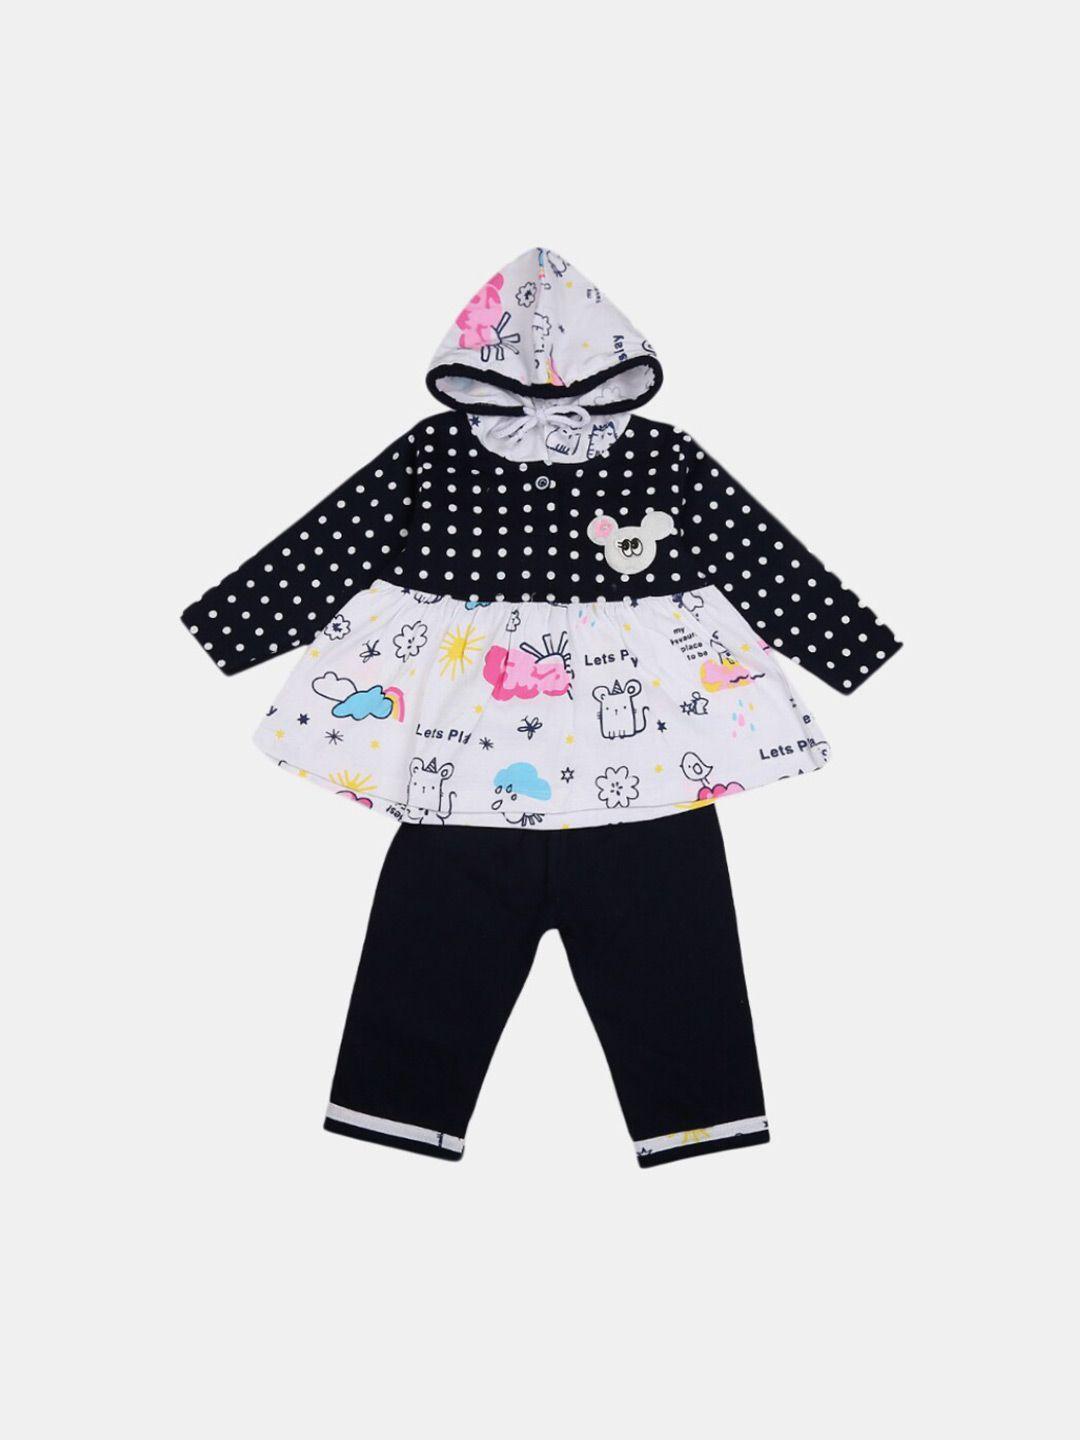 v-mart-kids-pack-of-2-conversational-printed-hooded-pure-cotton-clothing-set